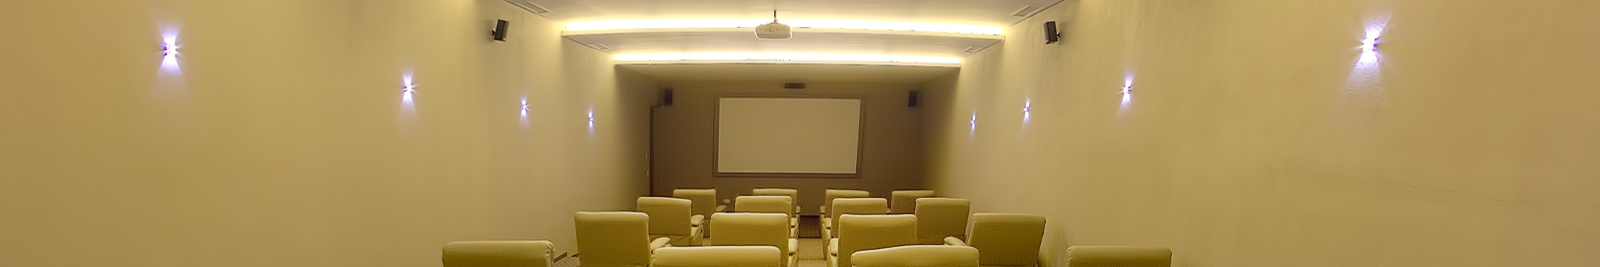 why-you-should-hire-electrician-for-home-theater-st-louis-missouri